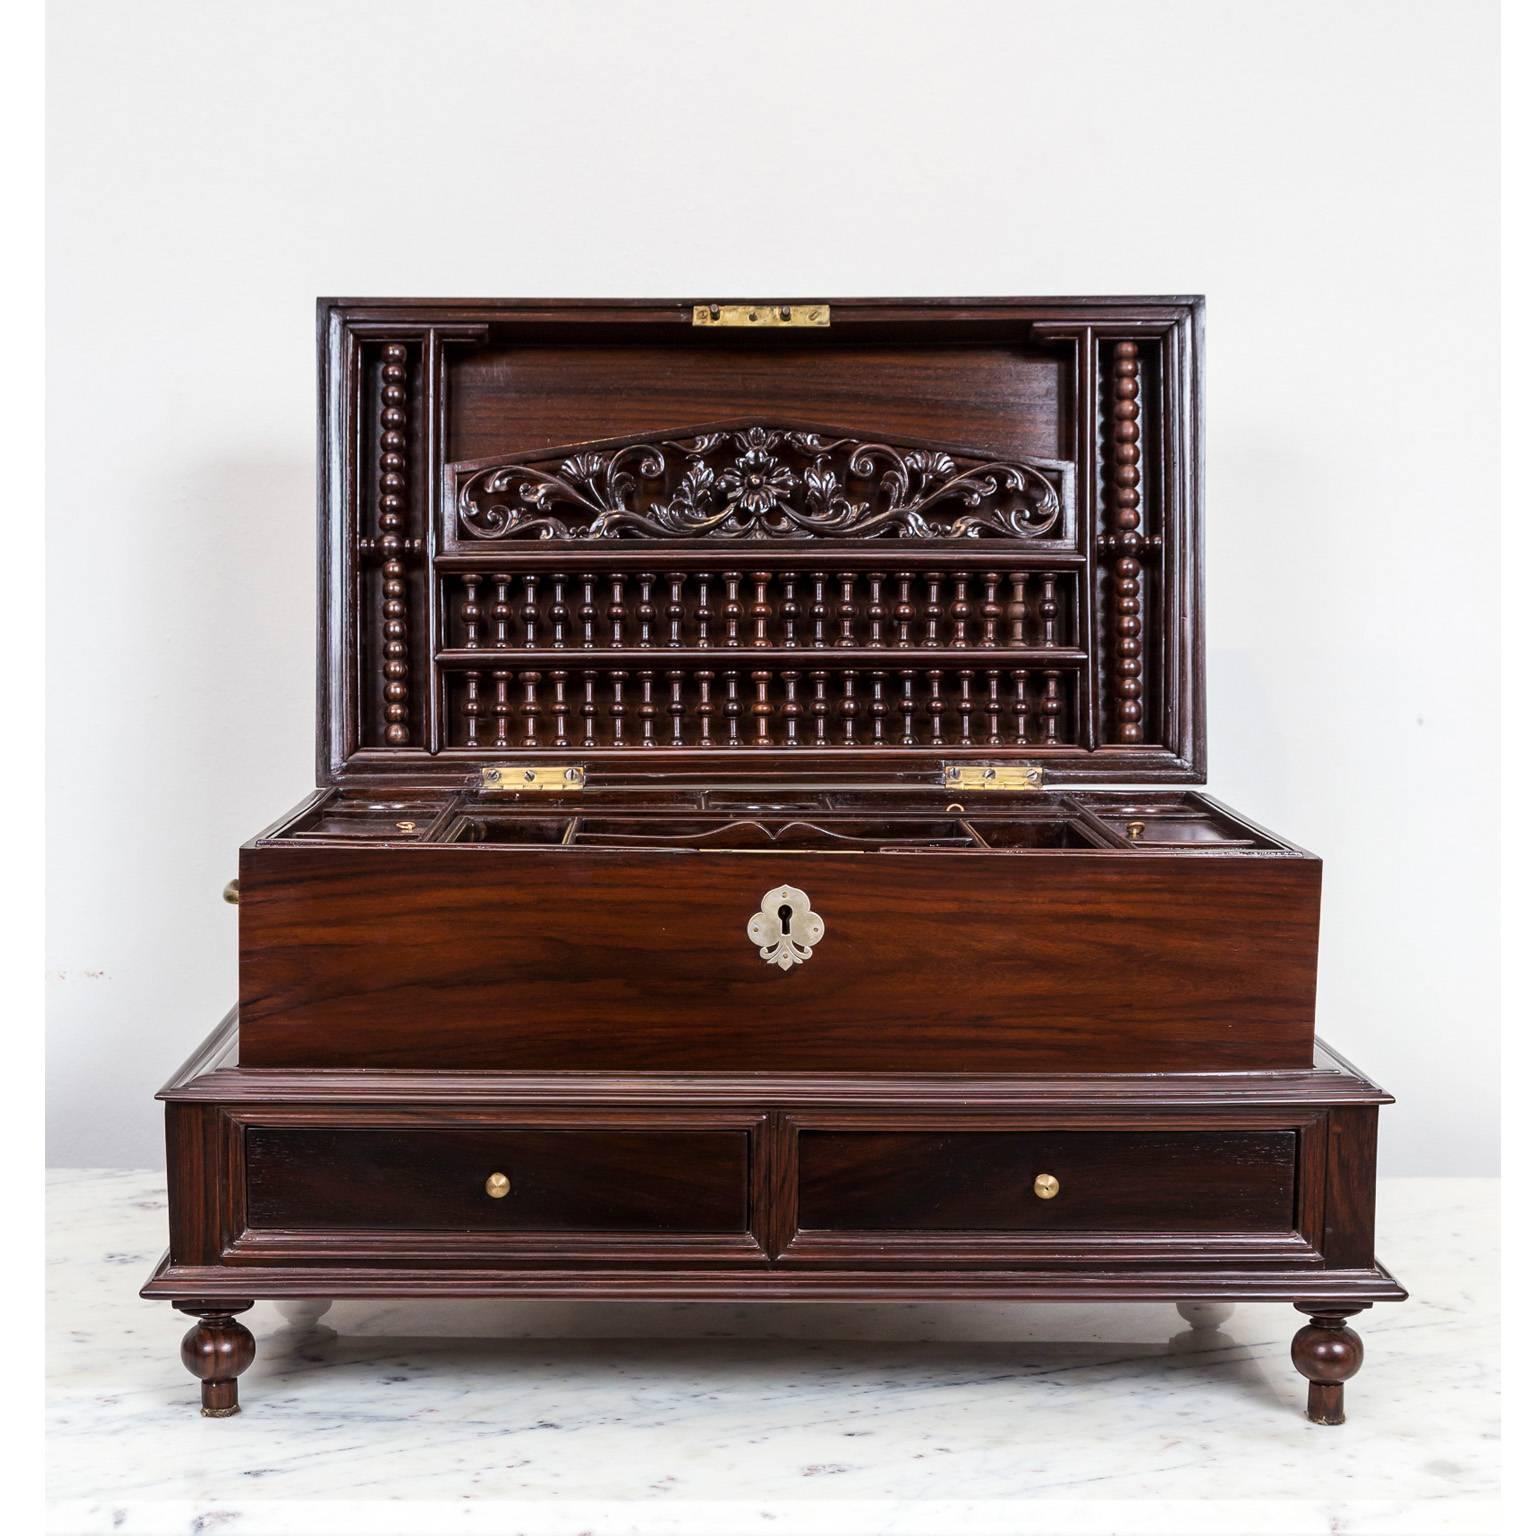 A beautifully grained rosewood, Dutch colonial box with a silver escutcheon and brass lift handles on the side.
The box opens to reveal a fitted interior with several small compartments and a detachable tray which conceals more storage space. A